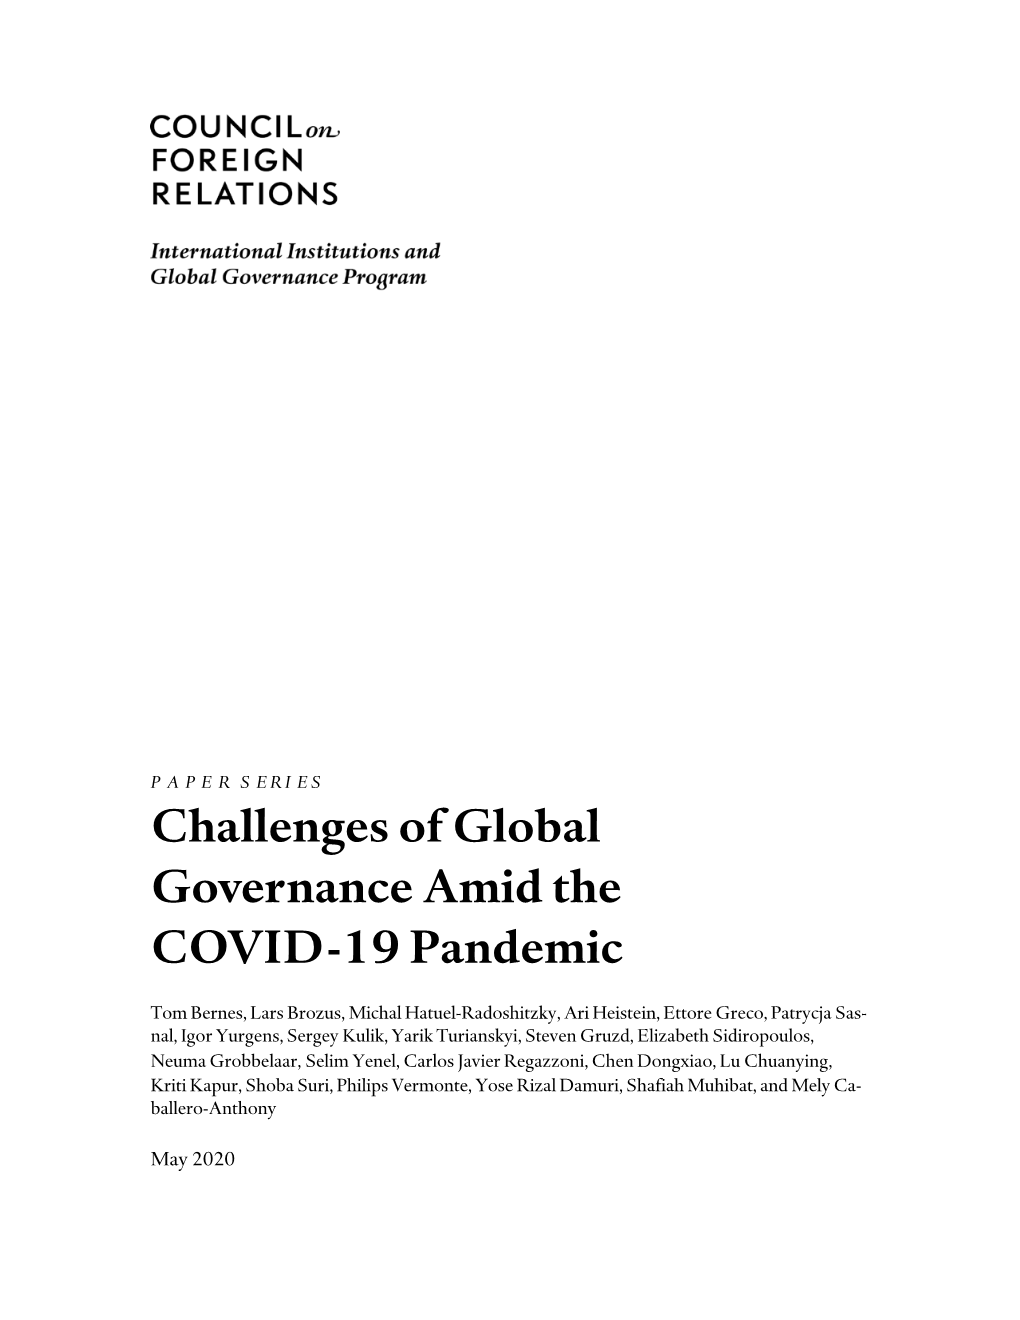 Challenges of Global Governance Amid the COVID-19 Pandemic